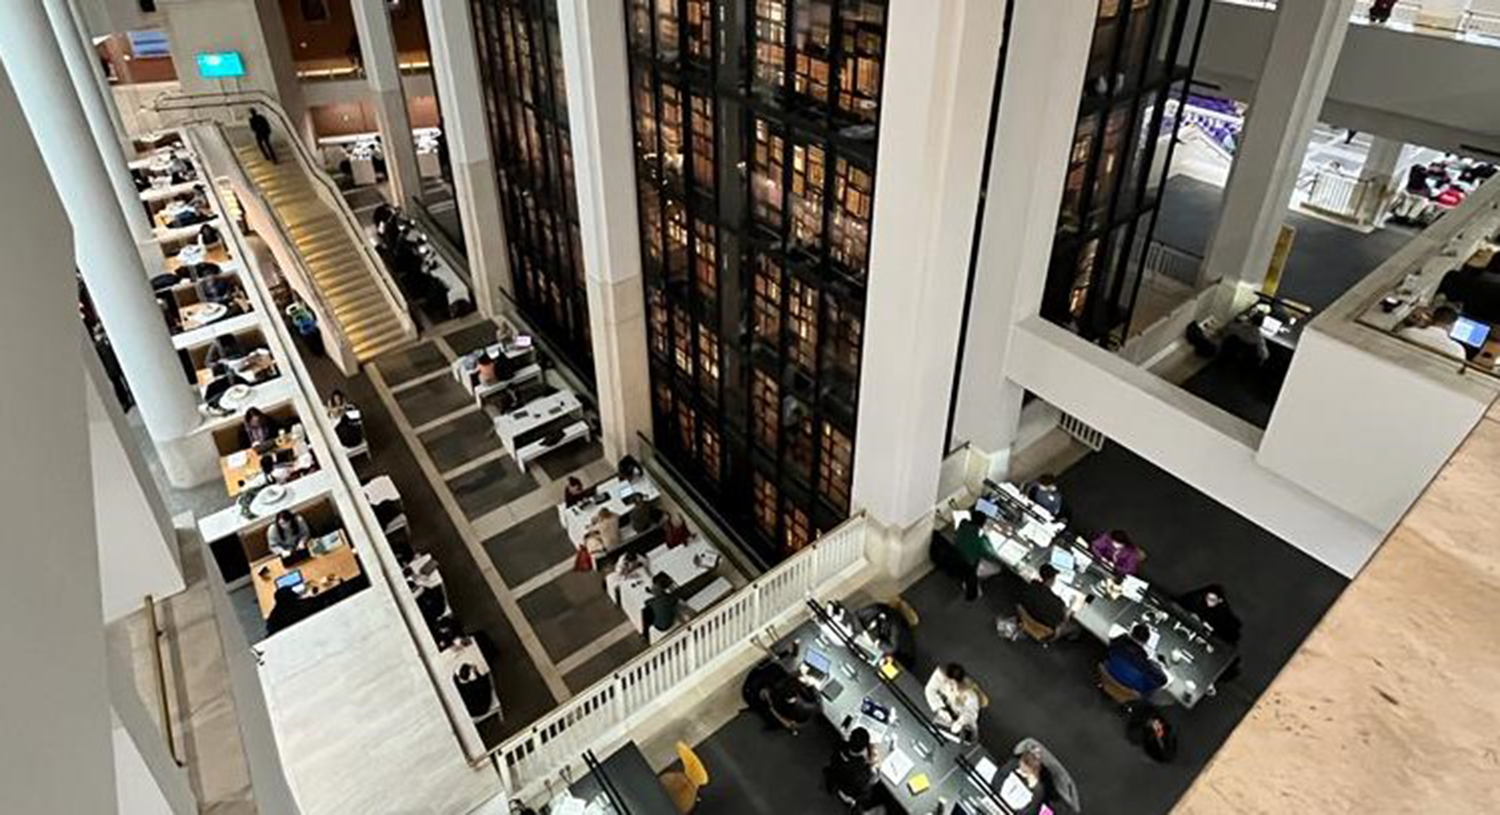 British Library, photo by Lea Manour